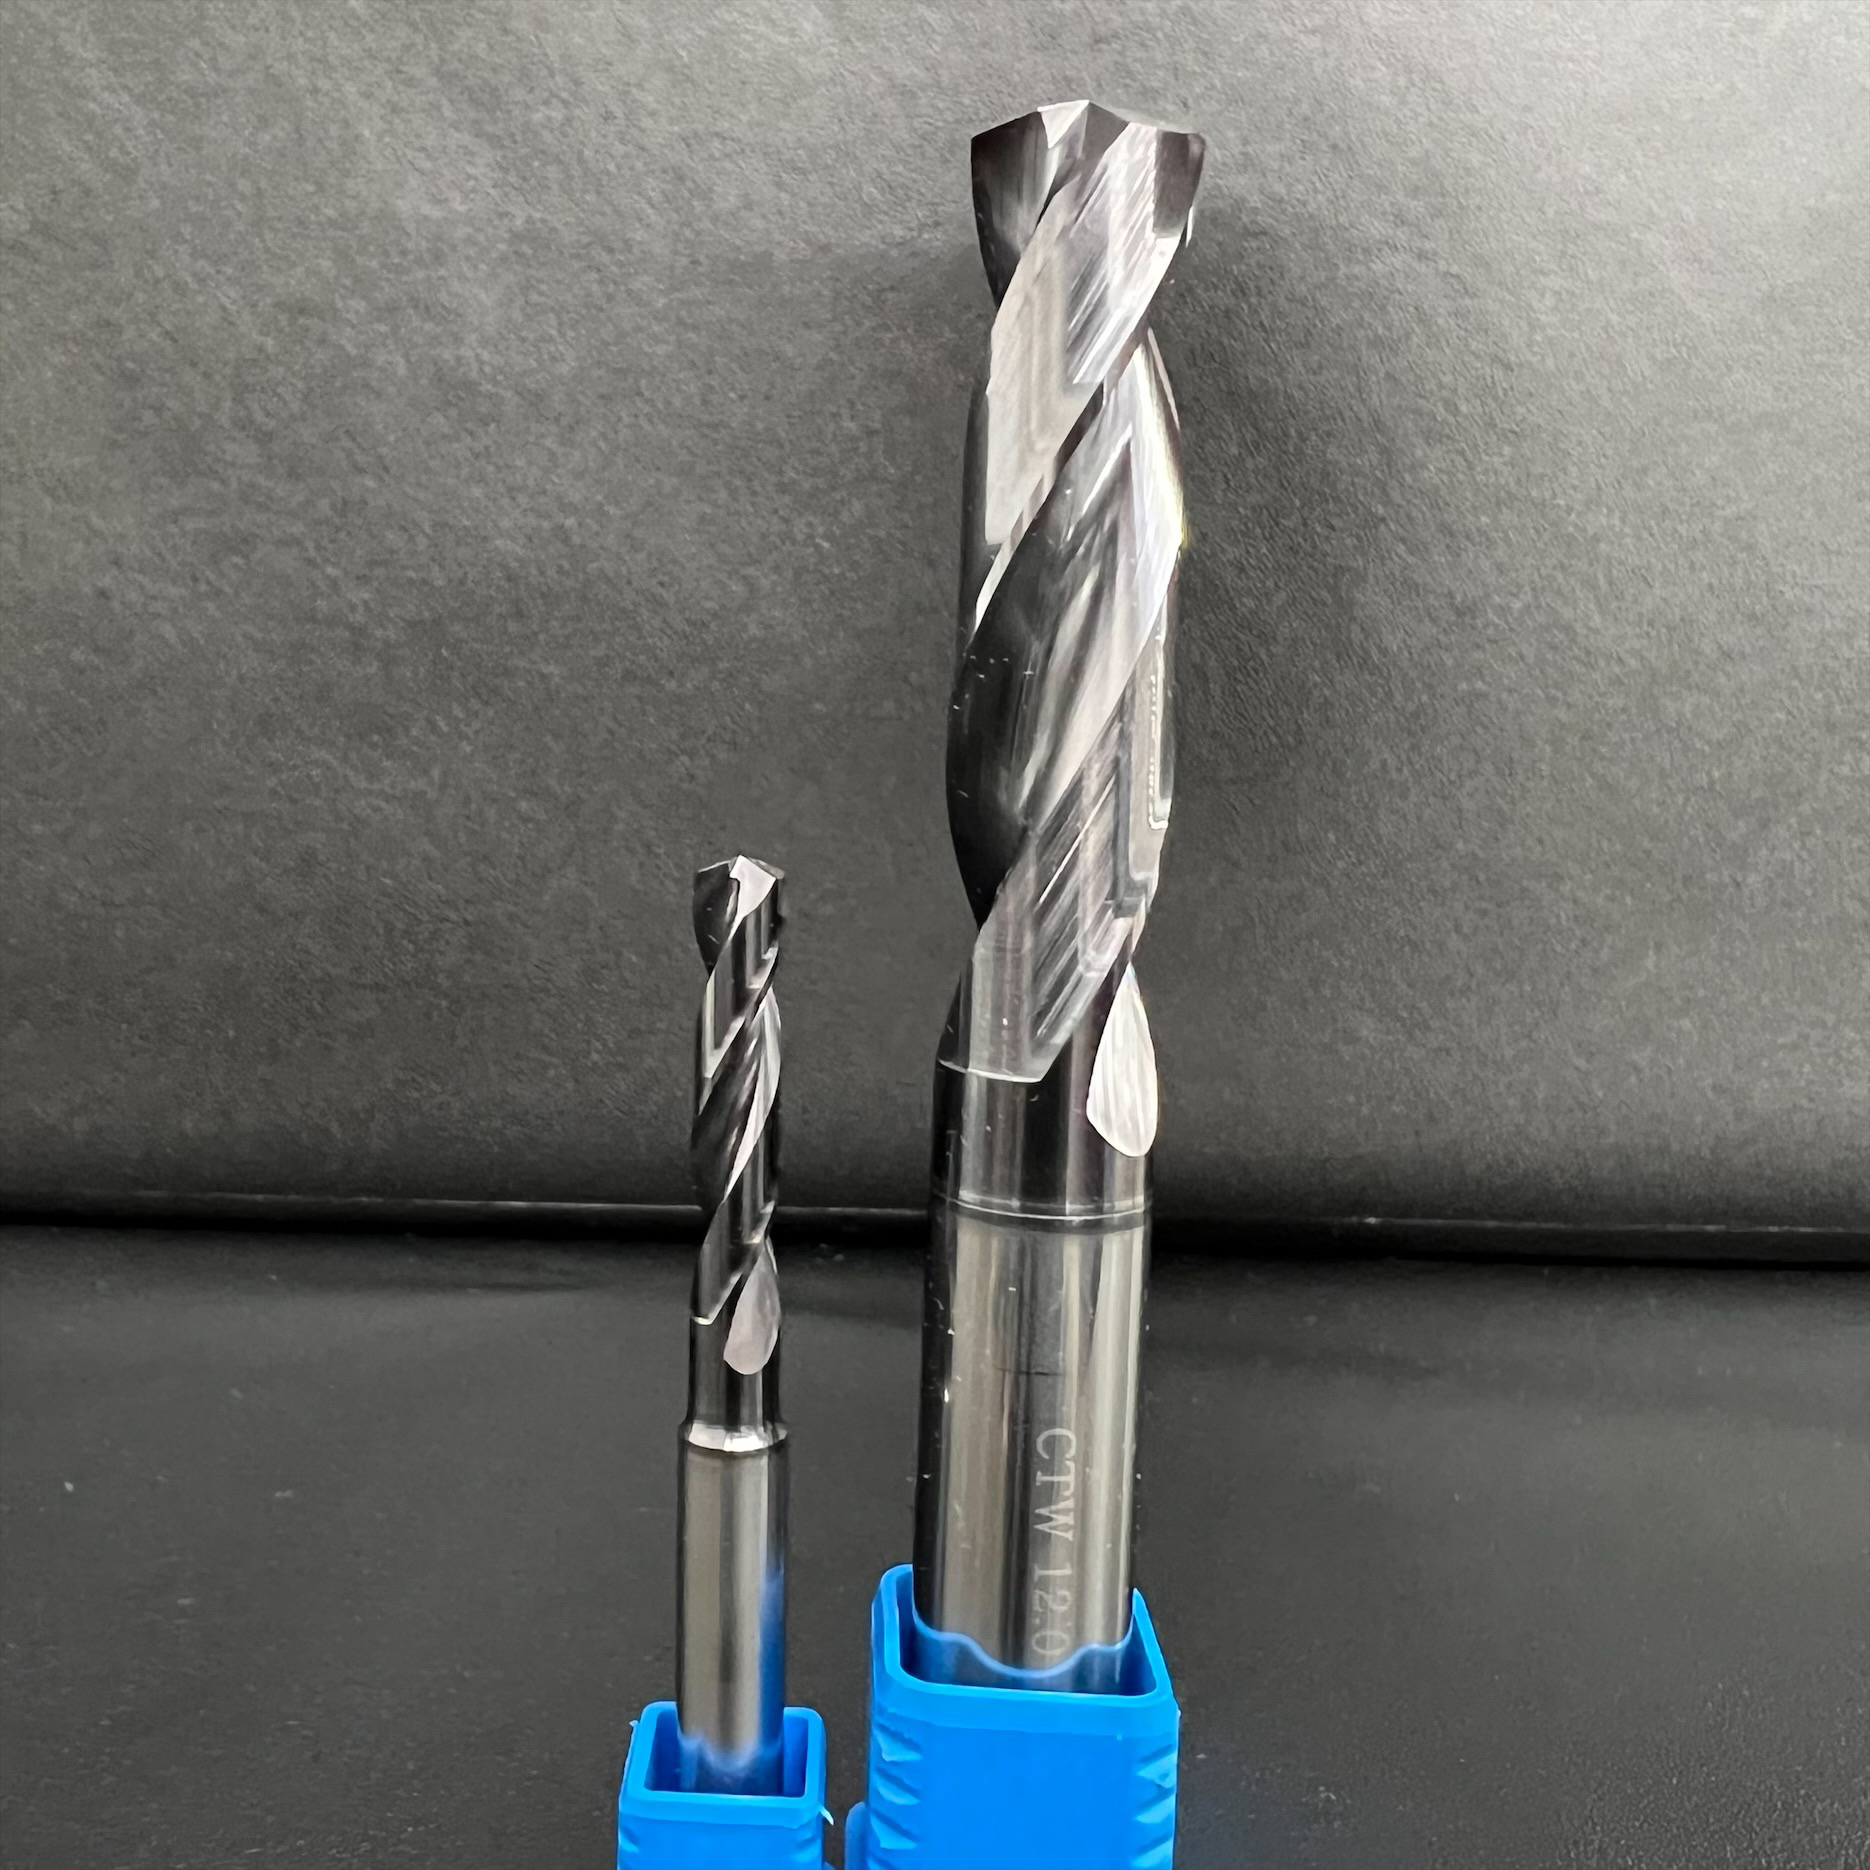 CTW3D 超硬3Dタイプオイル穴無し2枚刃ドリル【刀】 2 Flutes Tungsten Carbide Drill 3D Type without Oil Hole